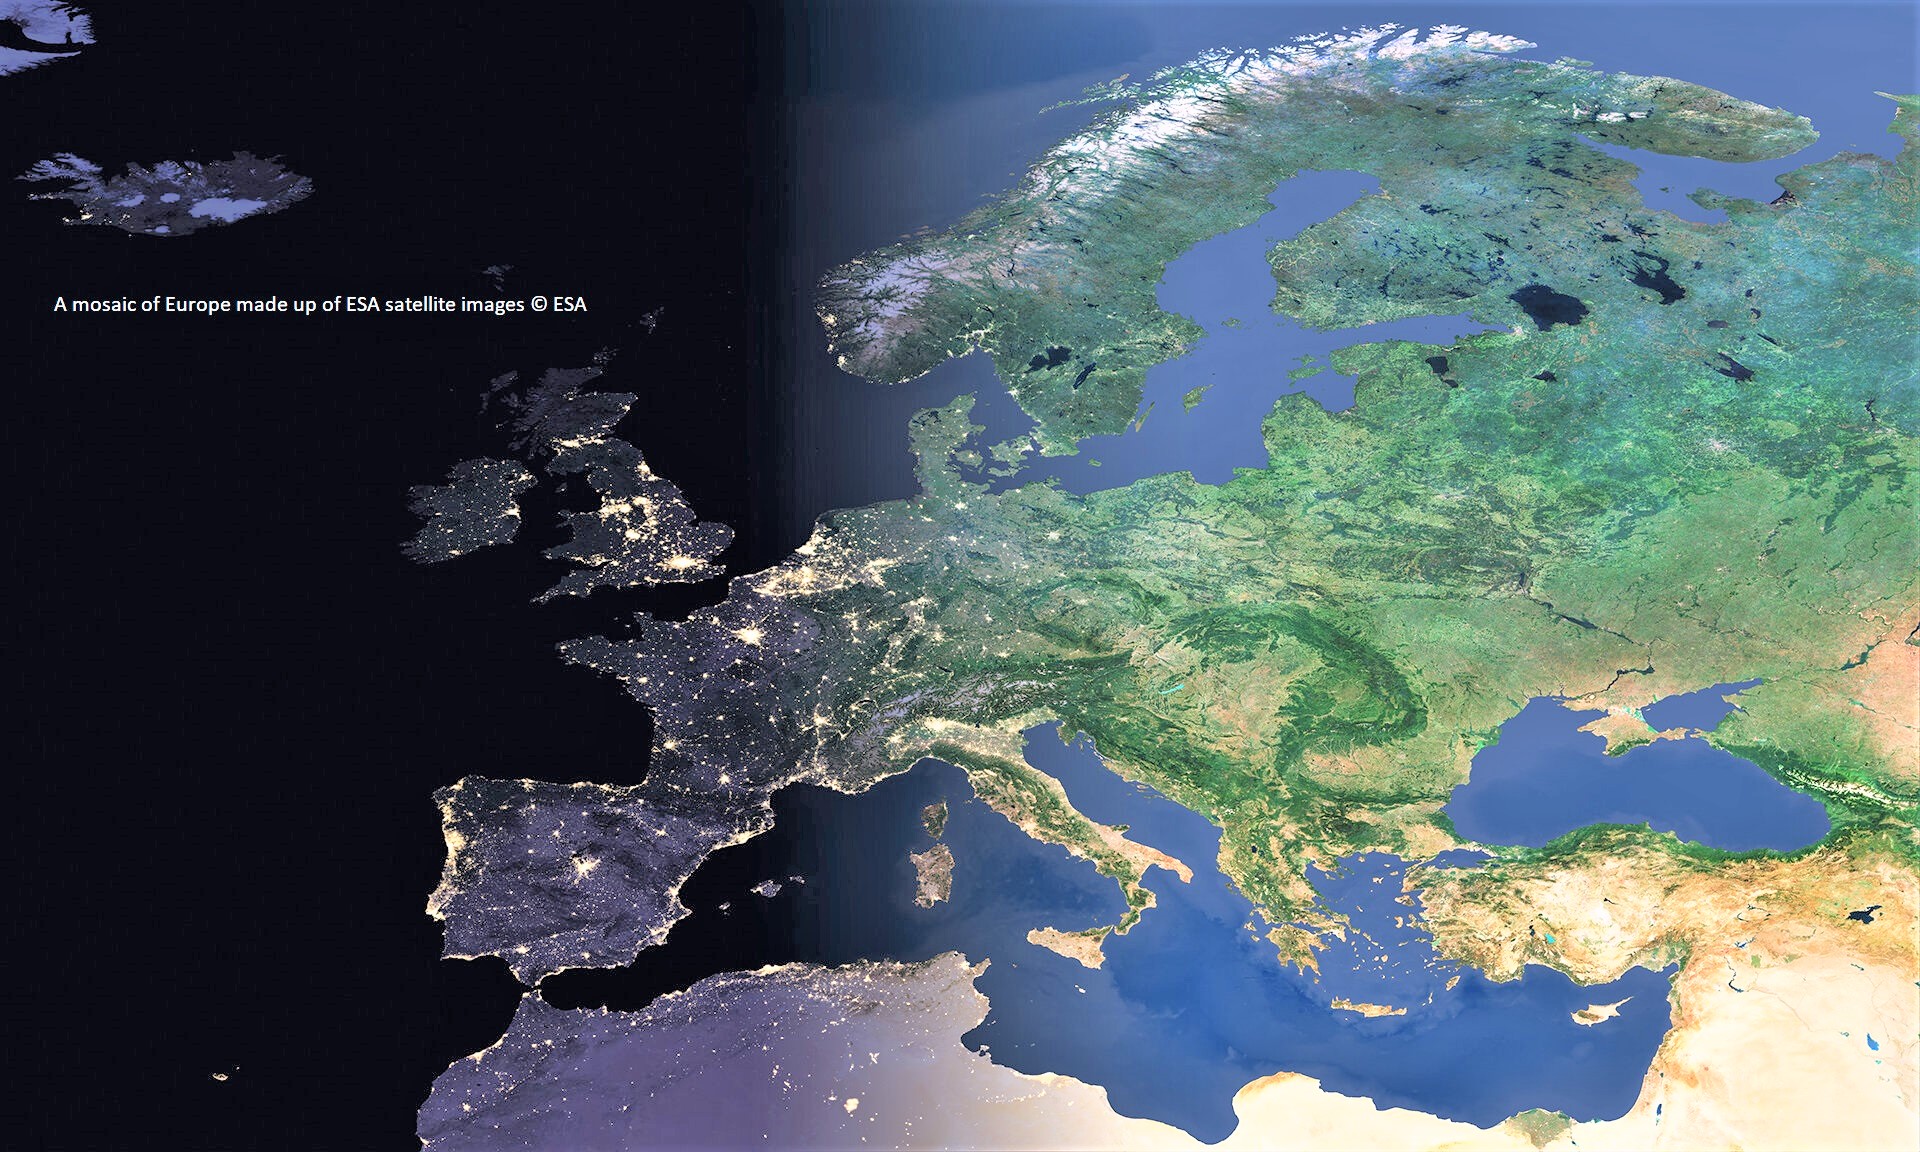 A mosaic of Europe made up of ESA satellite images